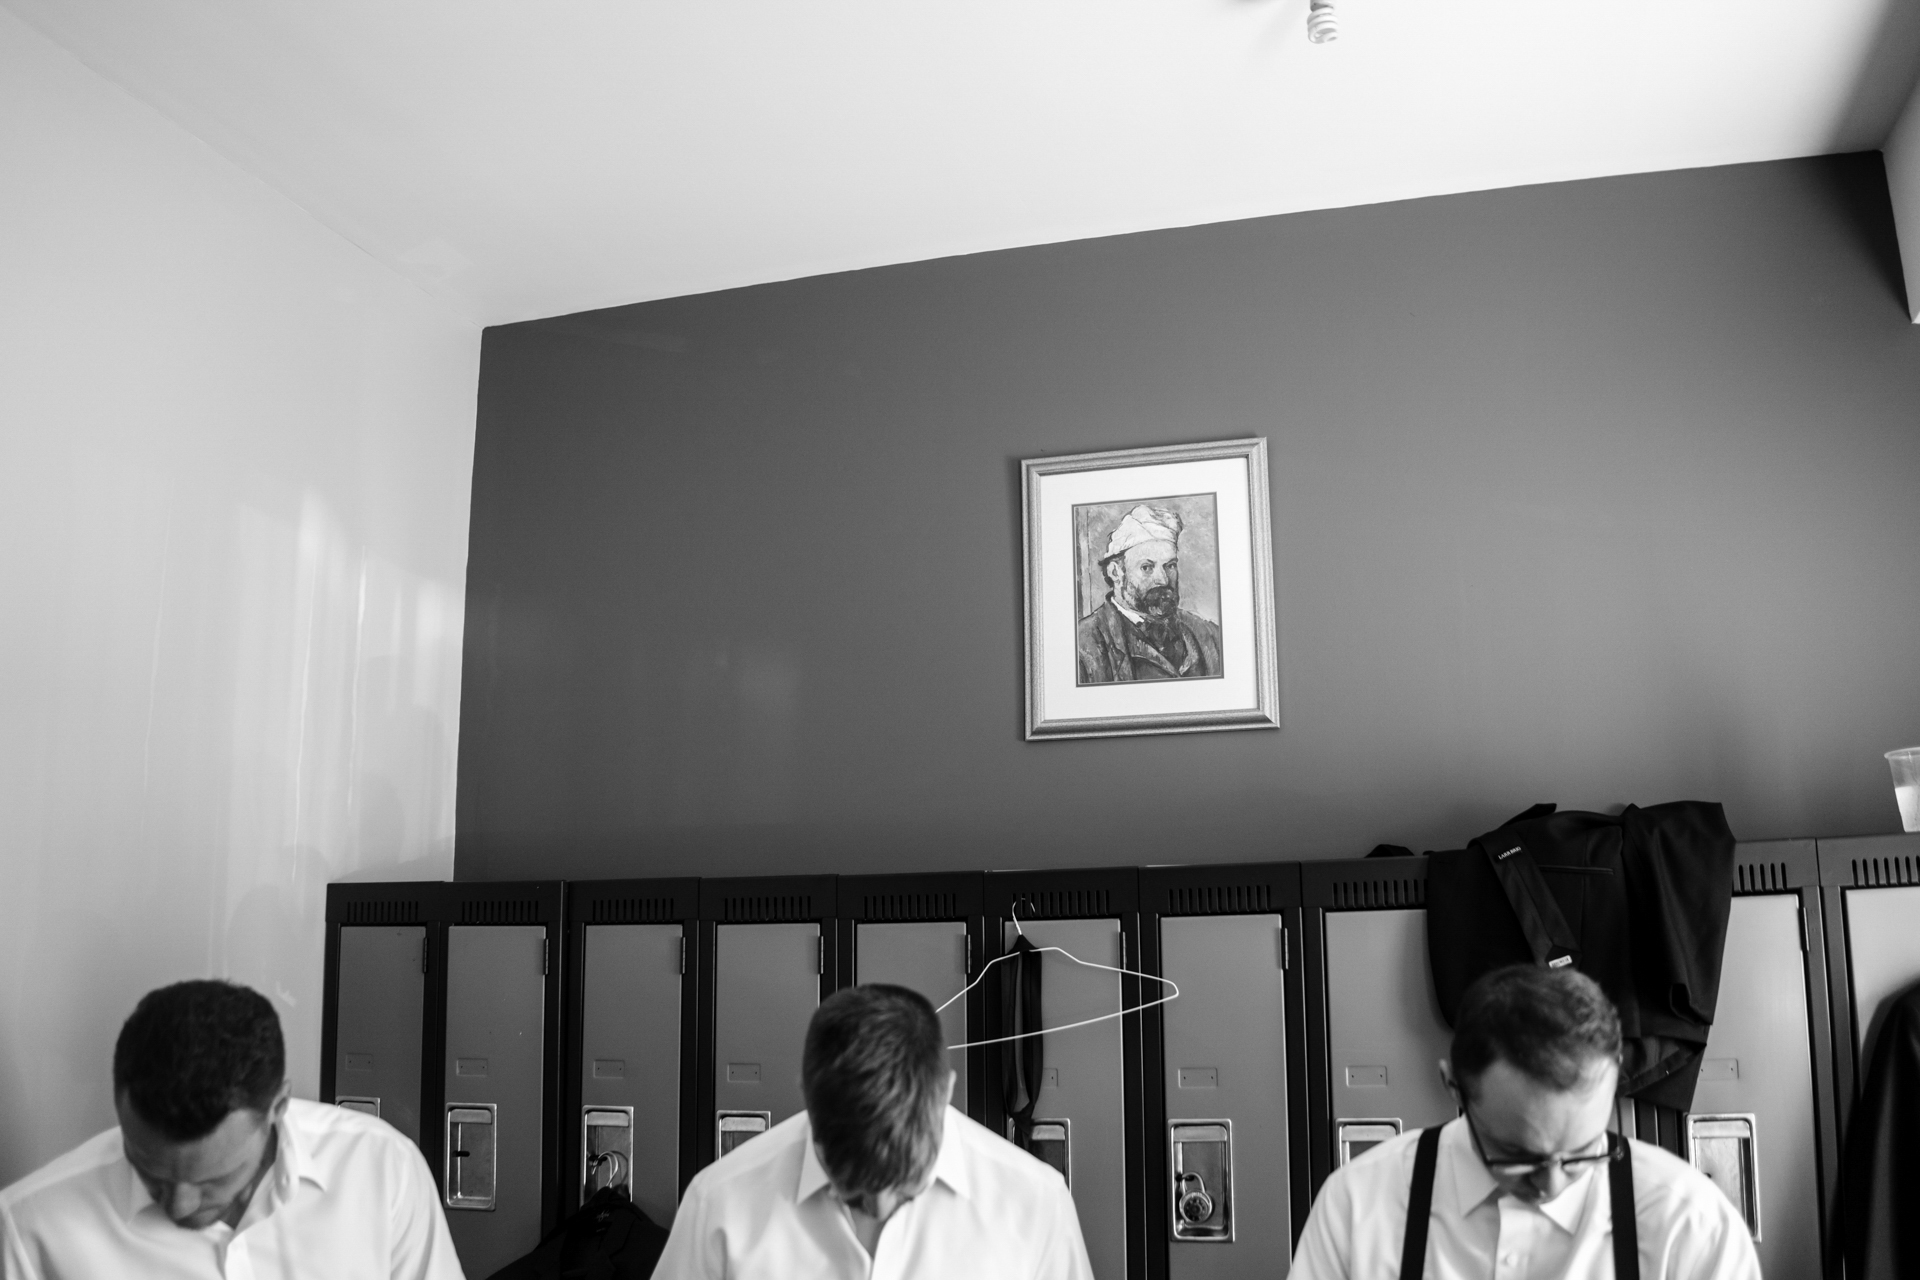 three groomsmen are taking clothes on in front of a portrait painting on the wall in the wedding day morning taken by documentary wedding photographer cafa liu